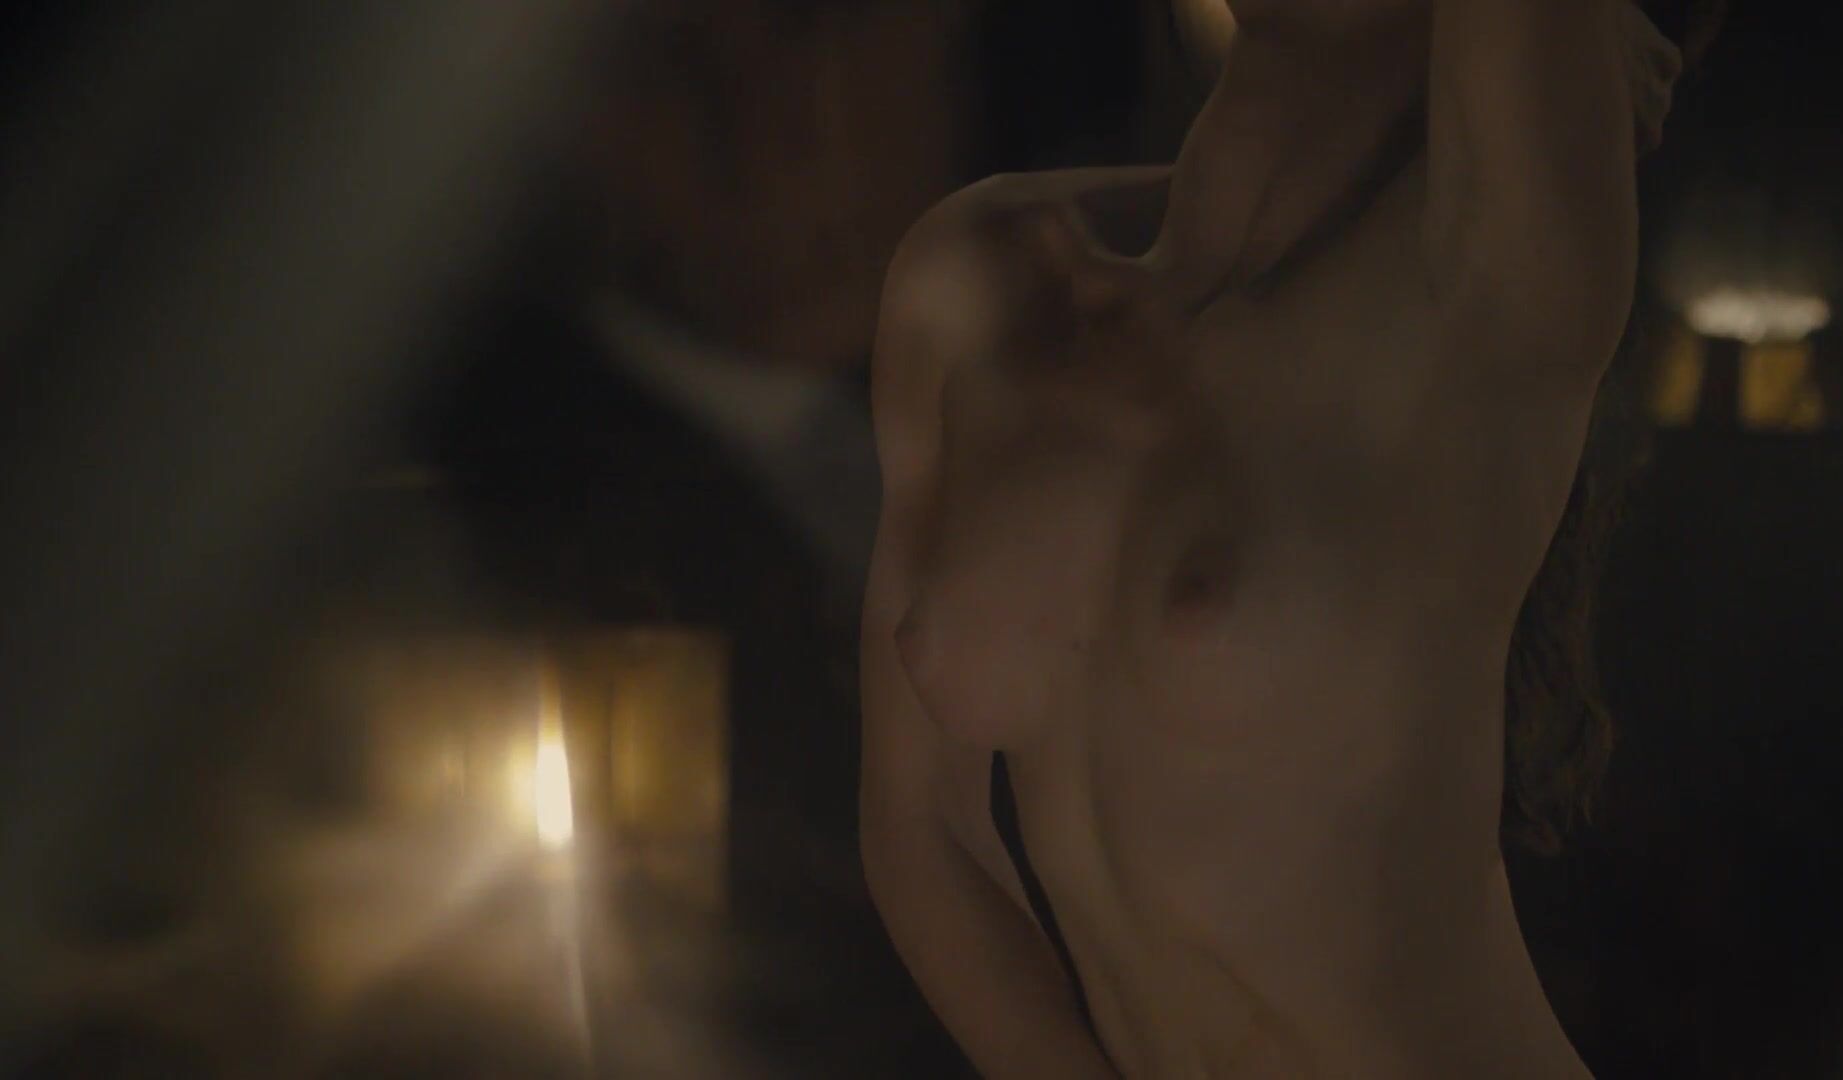 Camgirl Director focuses on Sonya Cullingford's nice boobies showing them in The Danish Girl Staxxx